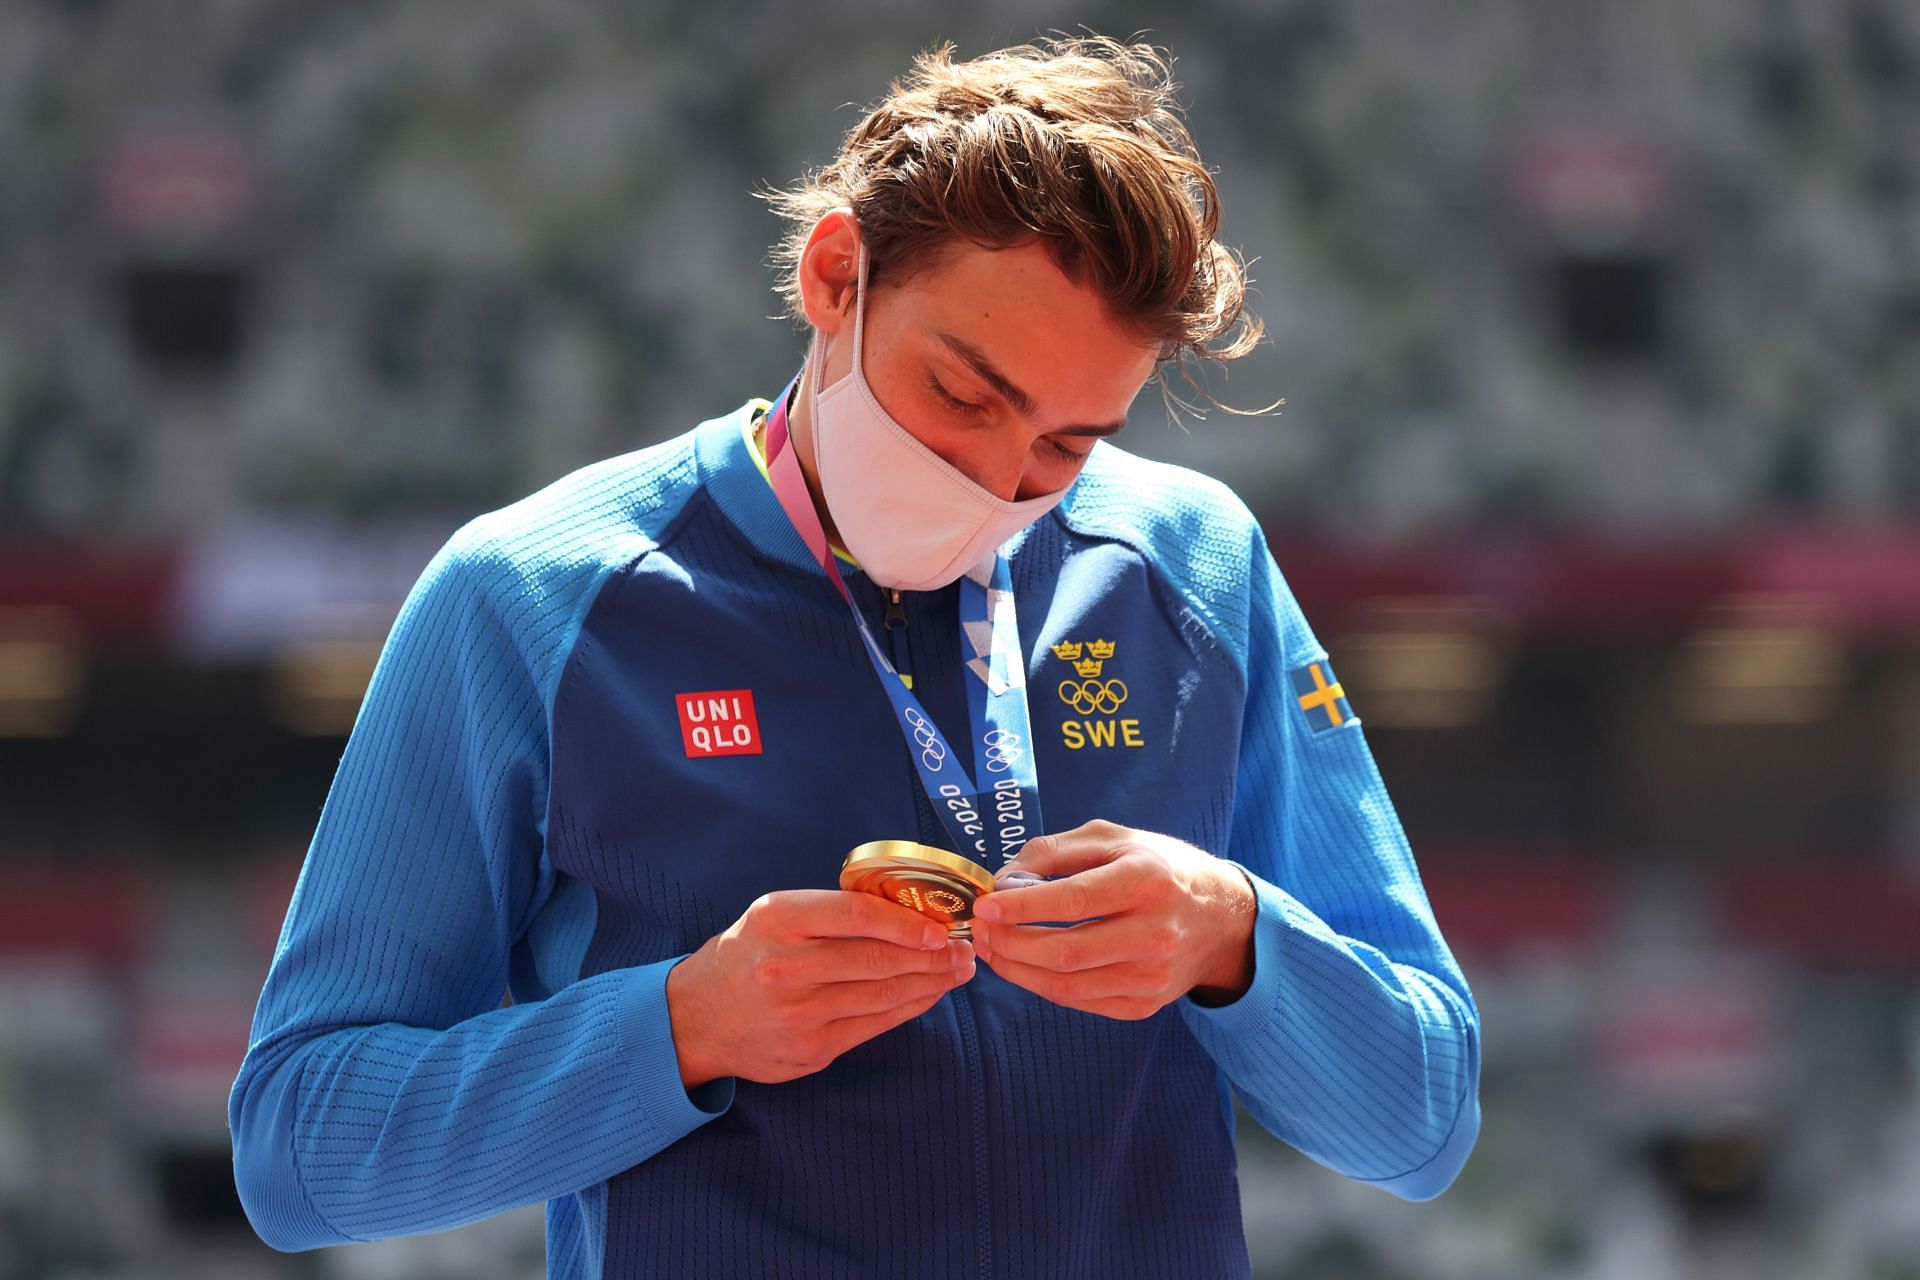 Gold medalist Armand Duplantis looks at his medal during the medal ceremony for the Men&#039;s Pole Vault Final at the 2020 Olympic Games in Tokyo, Japan.